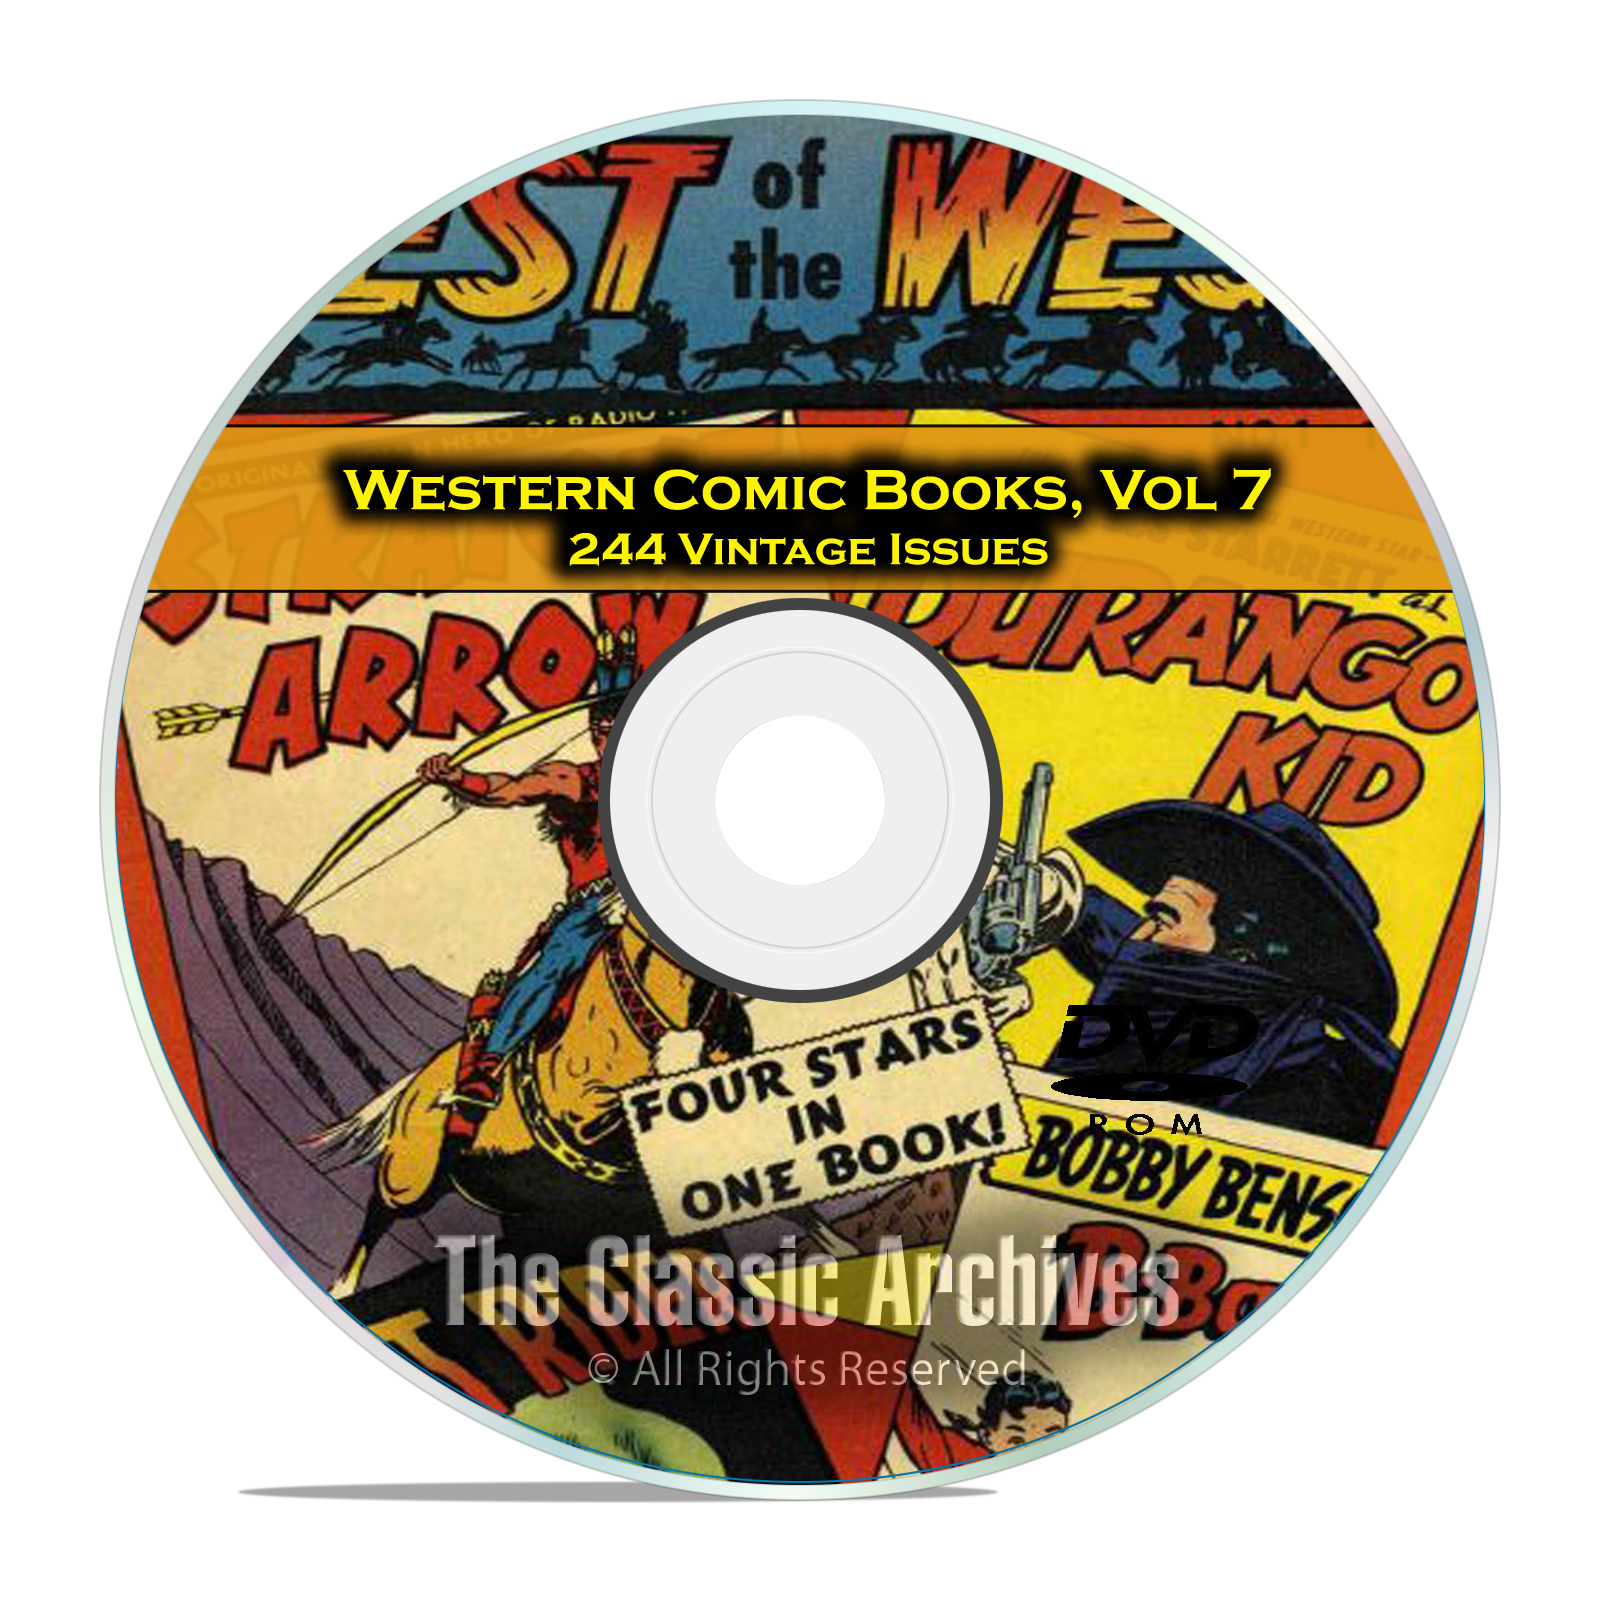 Western Comic Books, Vol 7, Best of the West, Straight Arrow Golden Age DVD